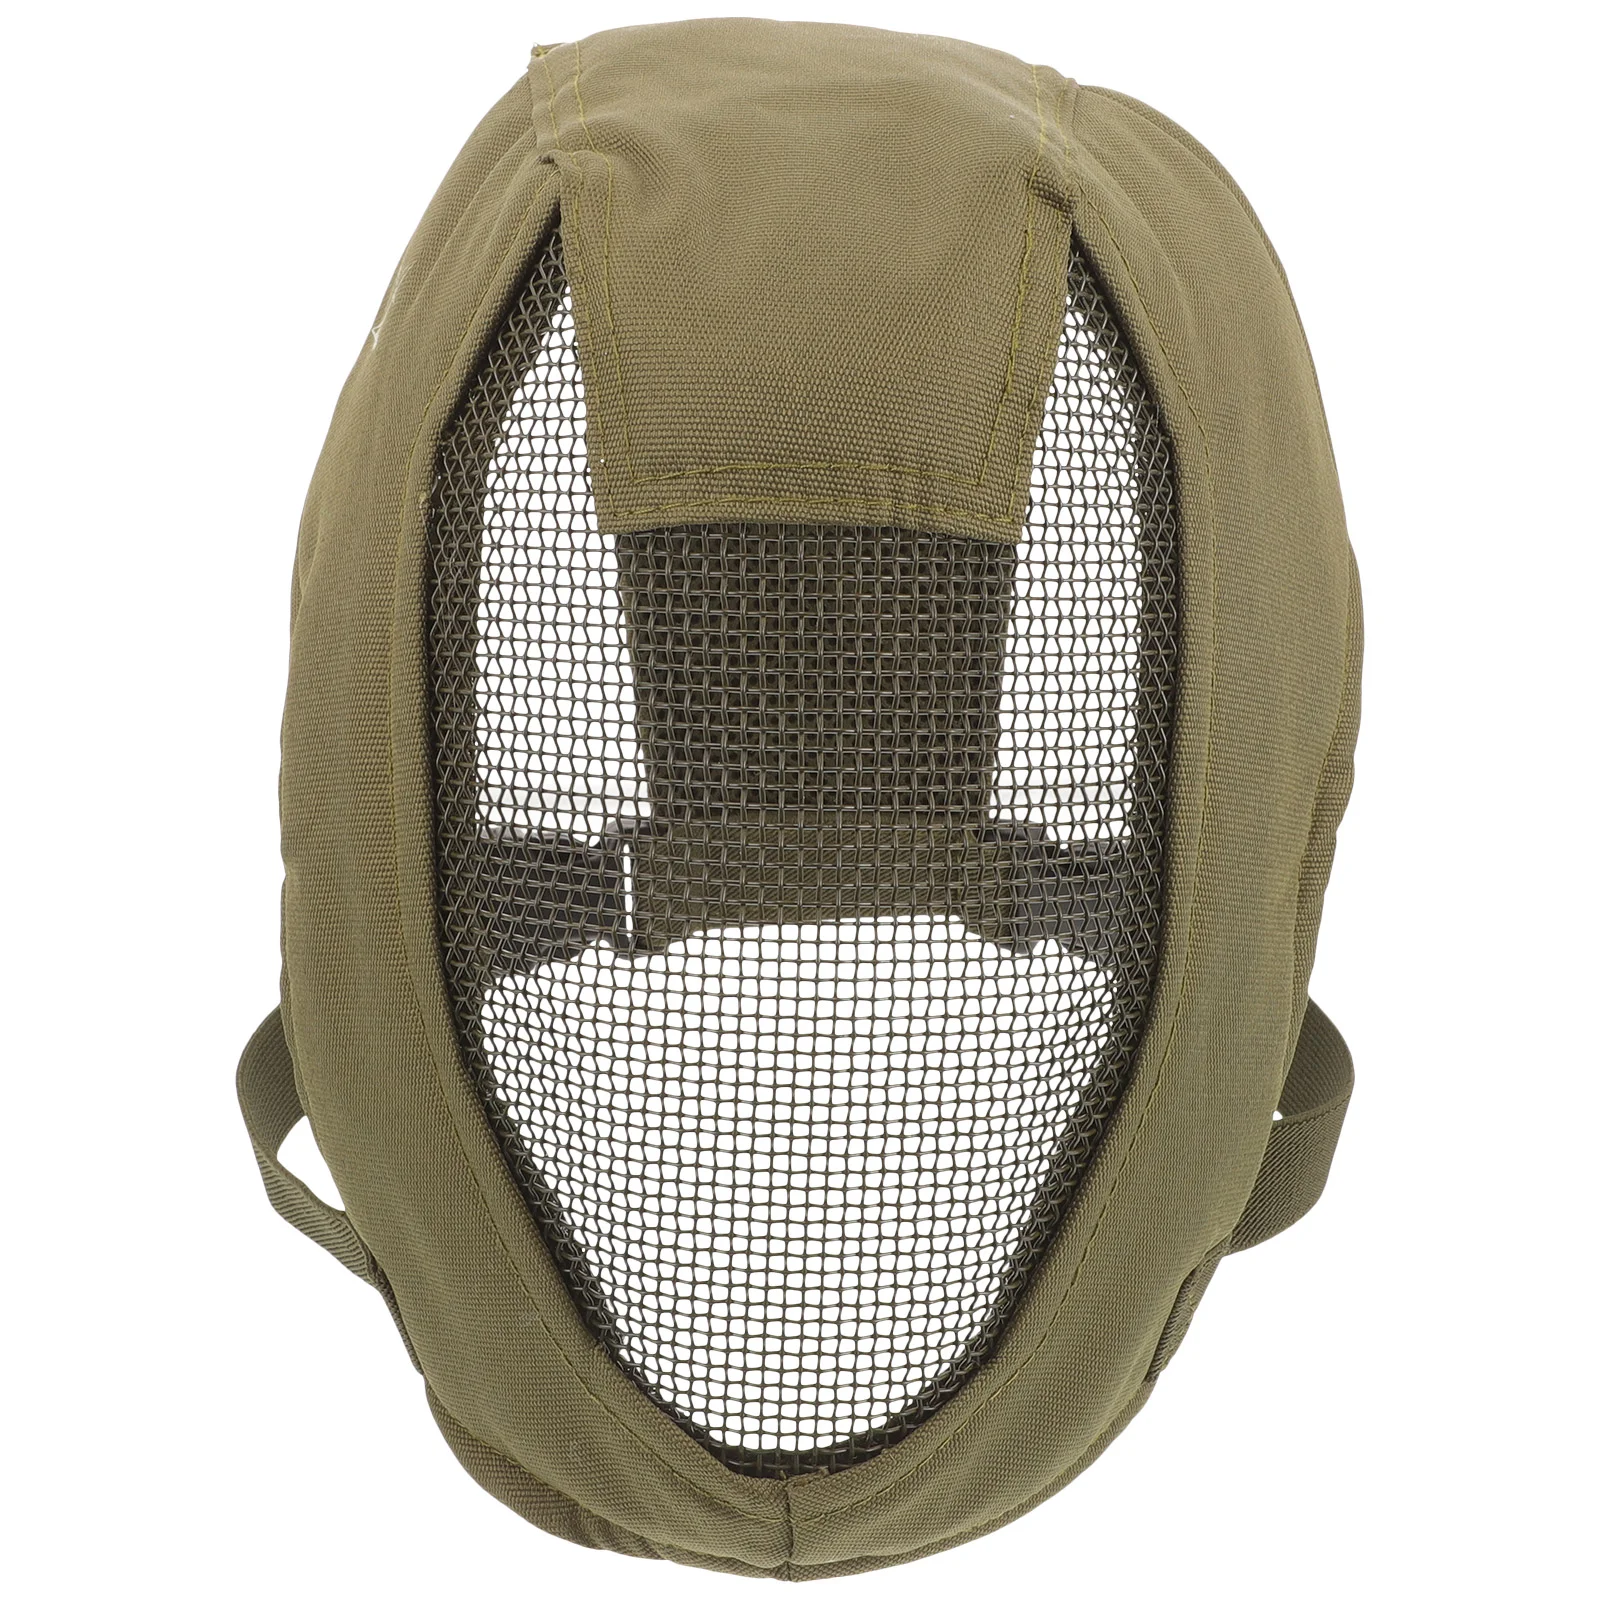 

The Mask Fencing Protective Face Guard Camping Breathable Field Head Cover Full